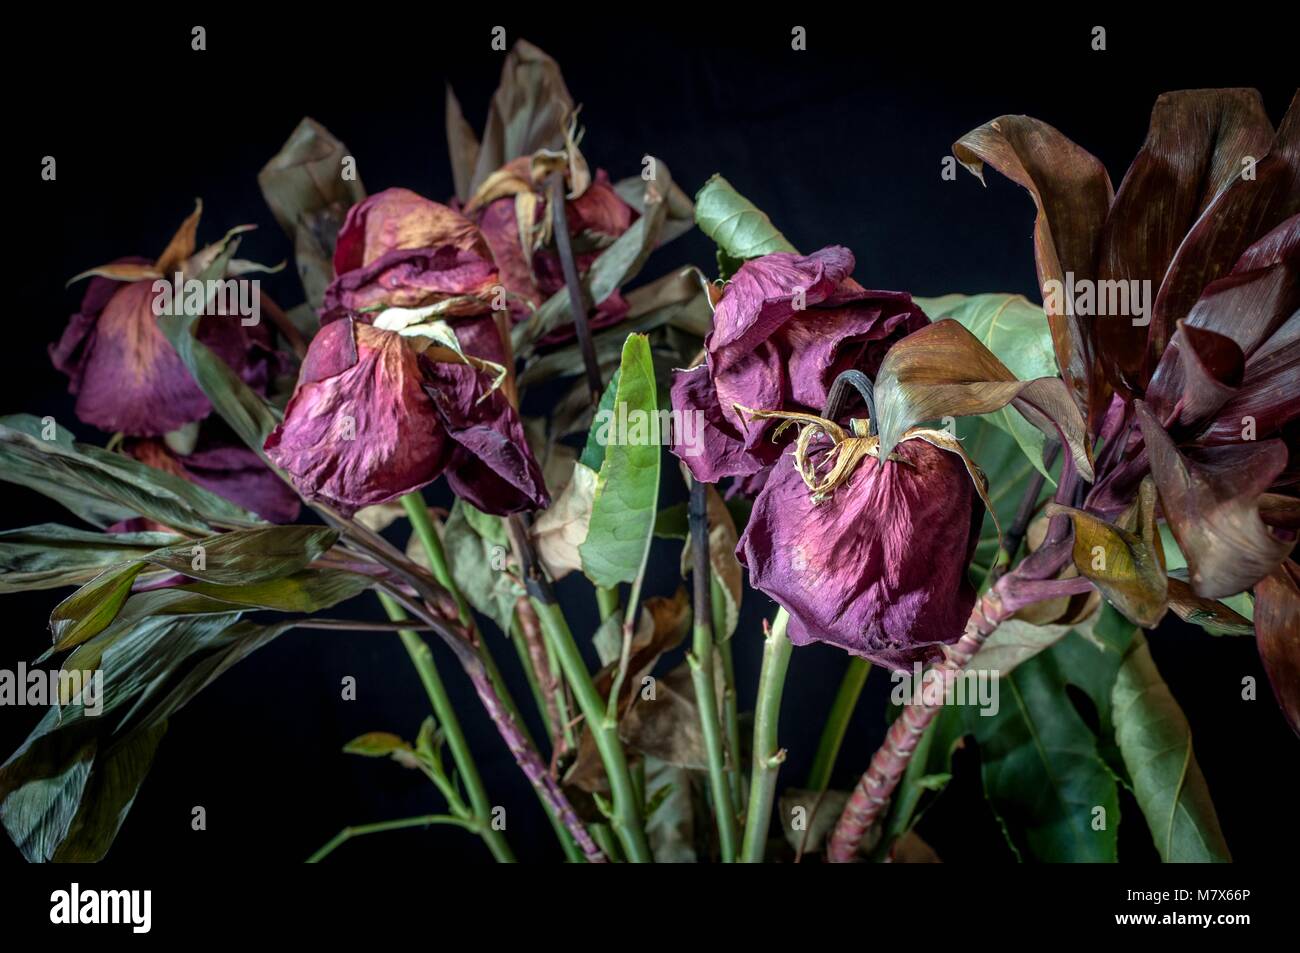 A bunch of dried up, dead red roses against a black background Stock Photo